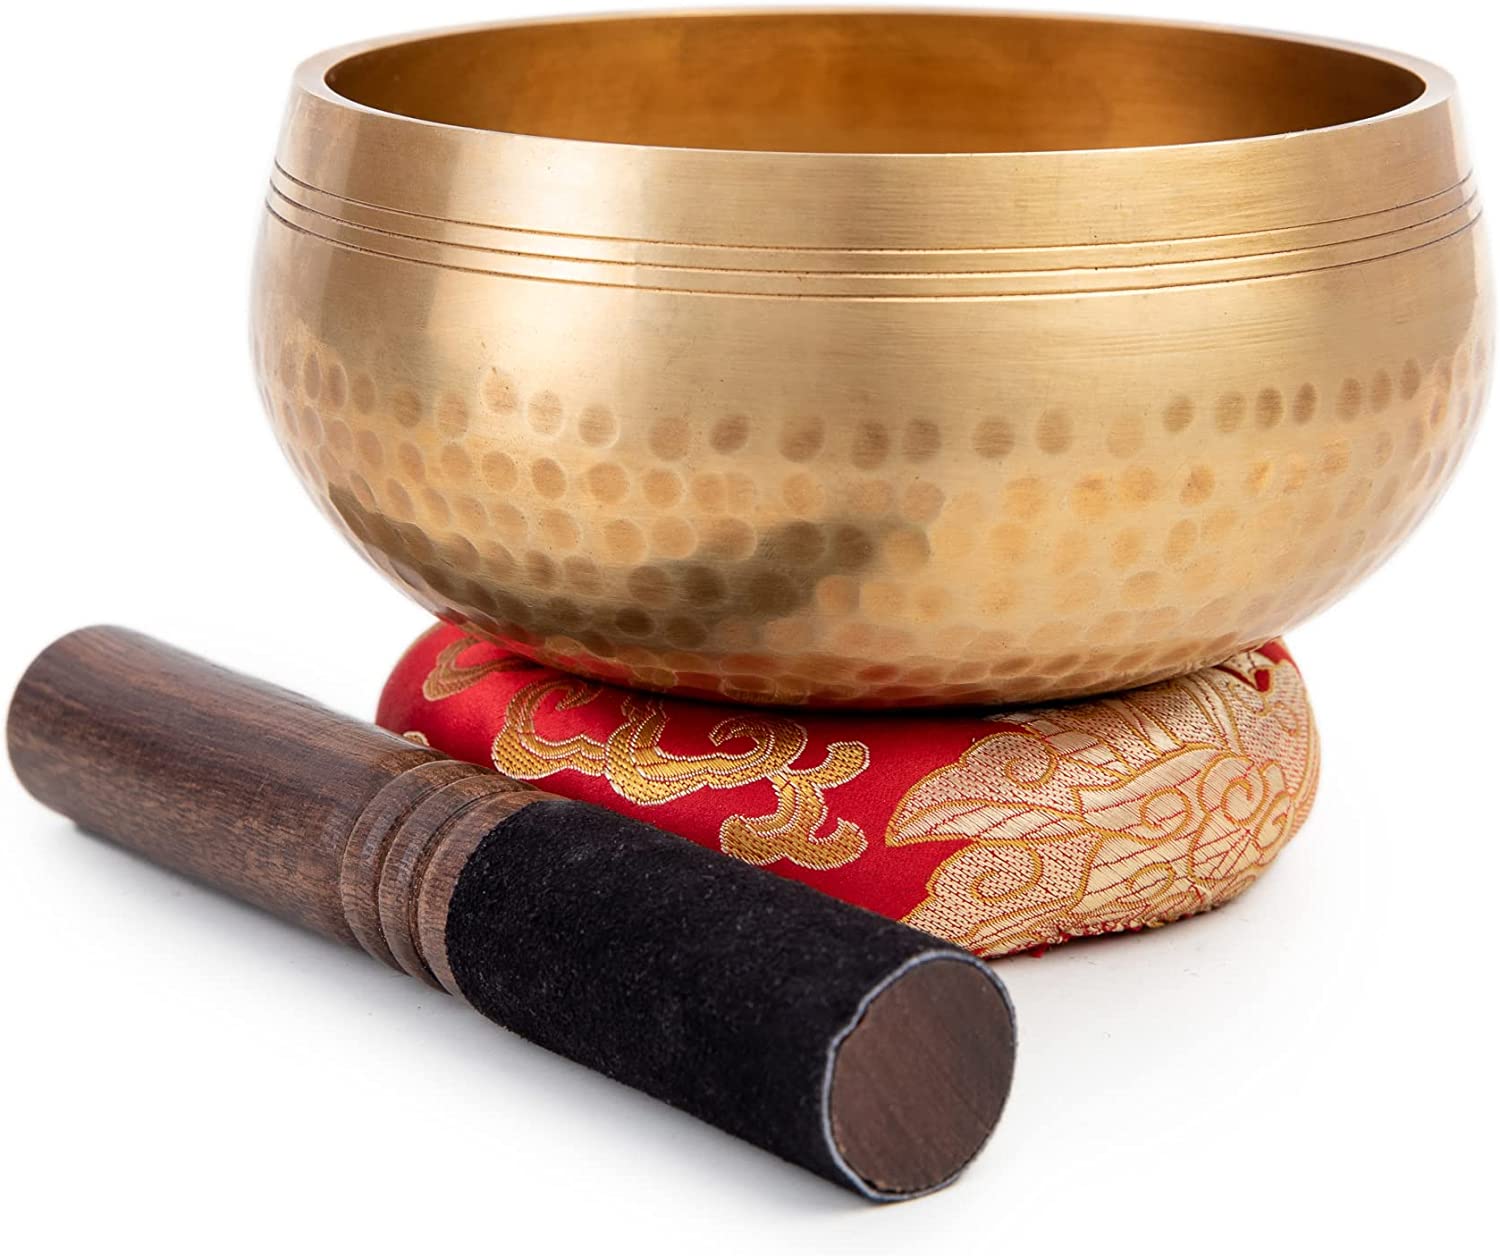 Tibetan Singing Bowl Set Easy To Play for Beginners Authentic  Handcrafted Mindfulness Meditation Holistic Sound Chakra Healing Gift by  Himalayan Bazaar (5